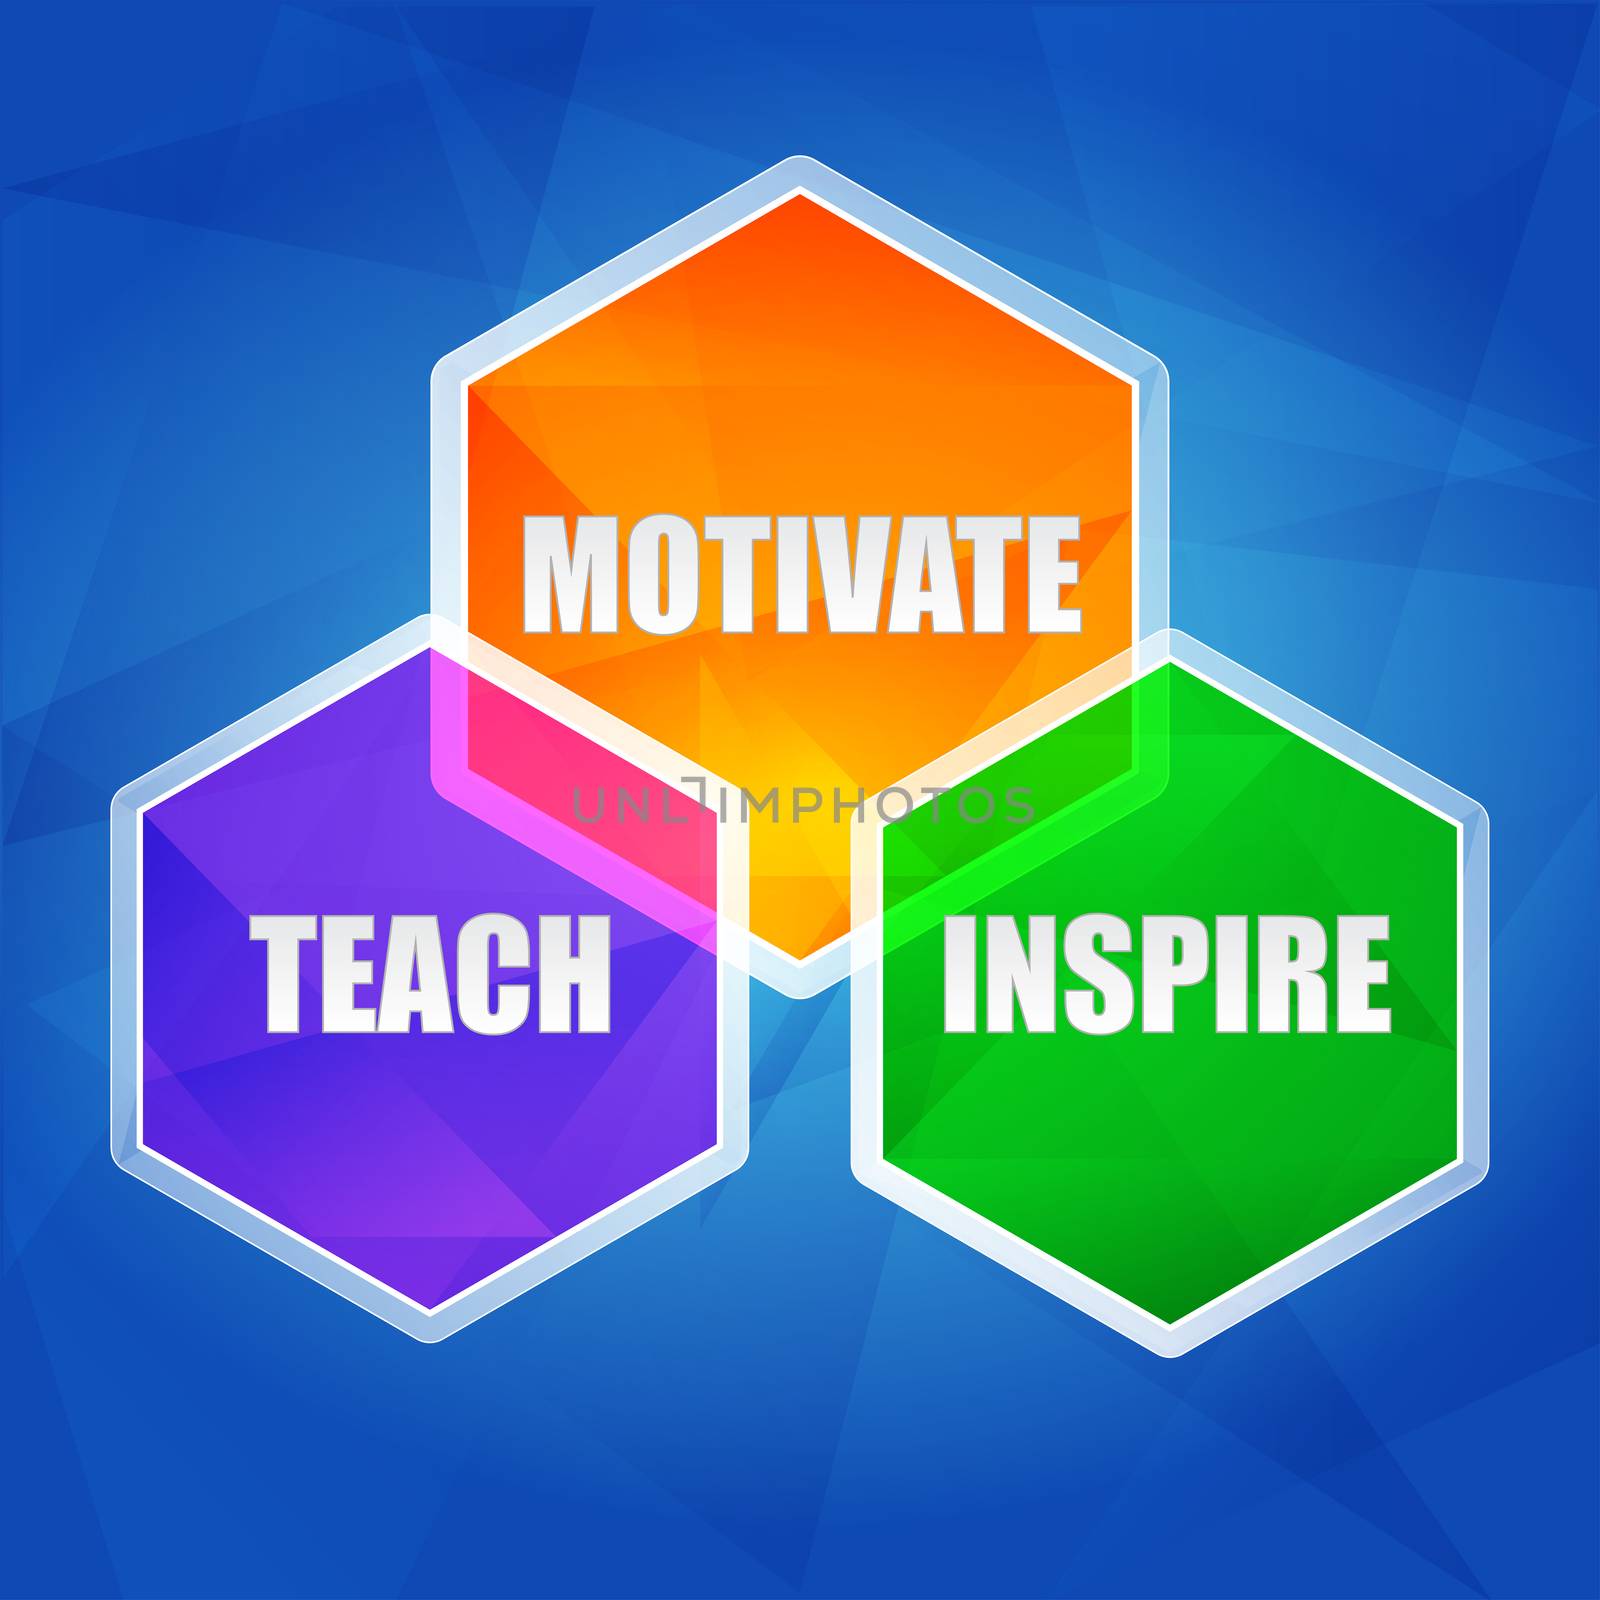 teach, inspire, motivate - education motivation concept words in color hexagons over blue background, flat design